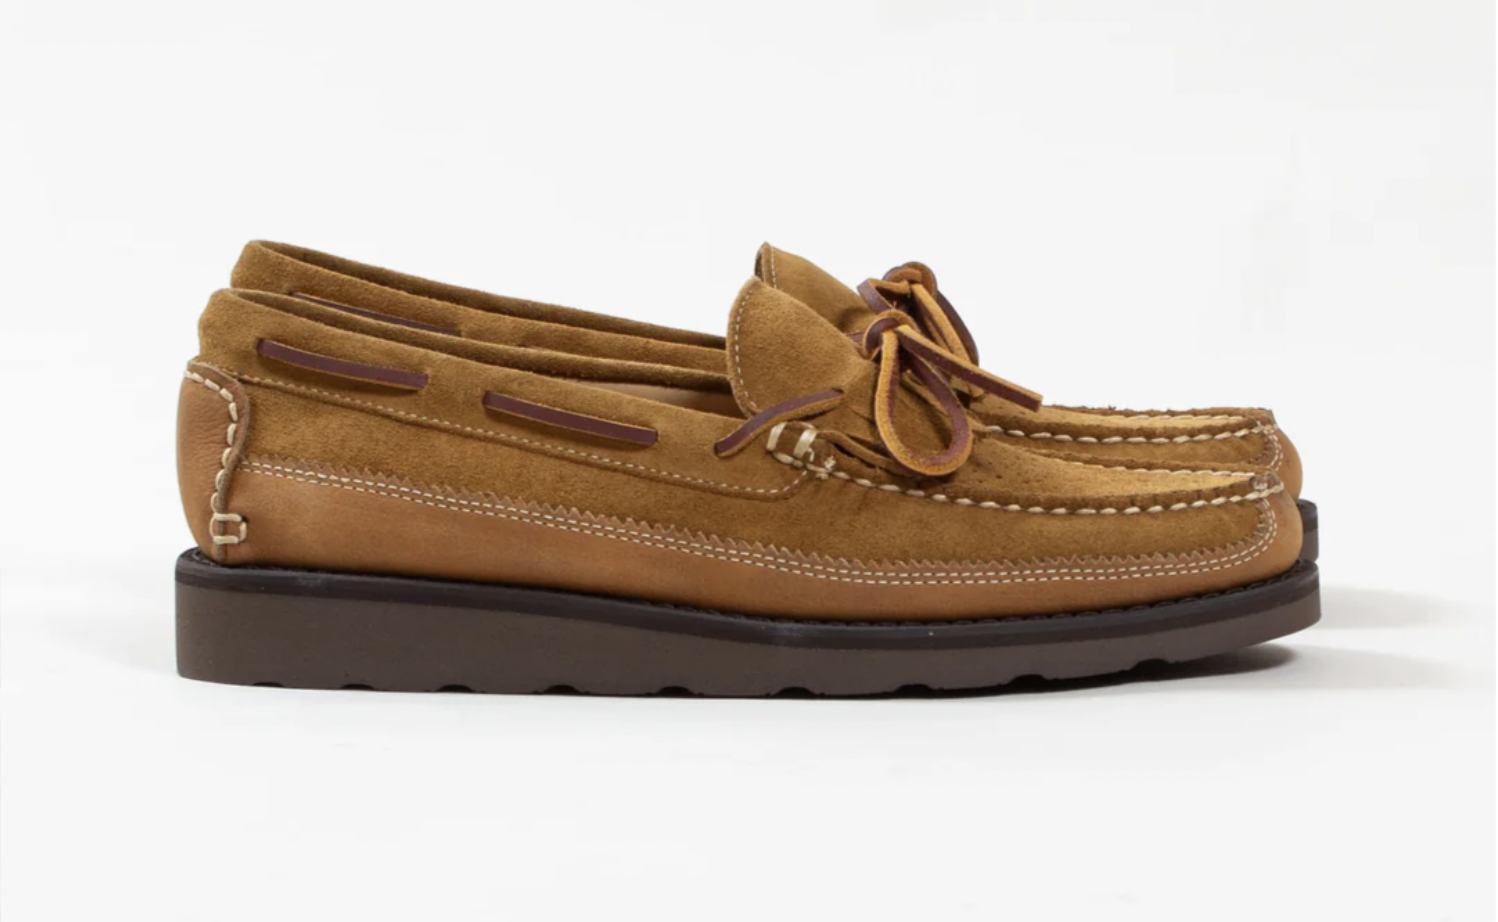 Bright Shoemakers - Kiltie Mocc Loafer - Gold/Tan Suede